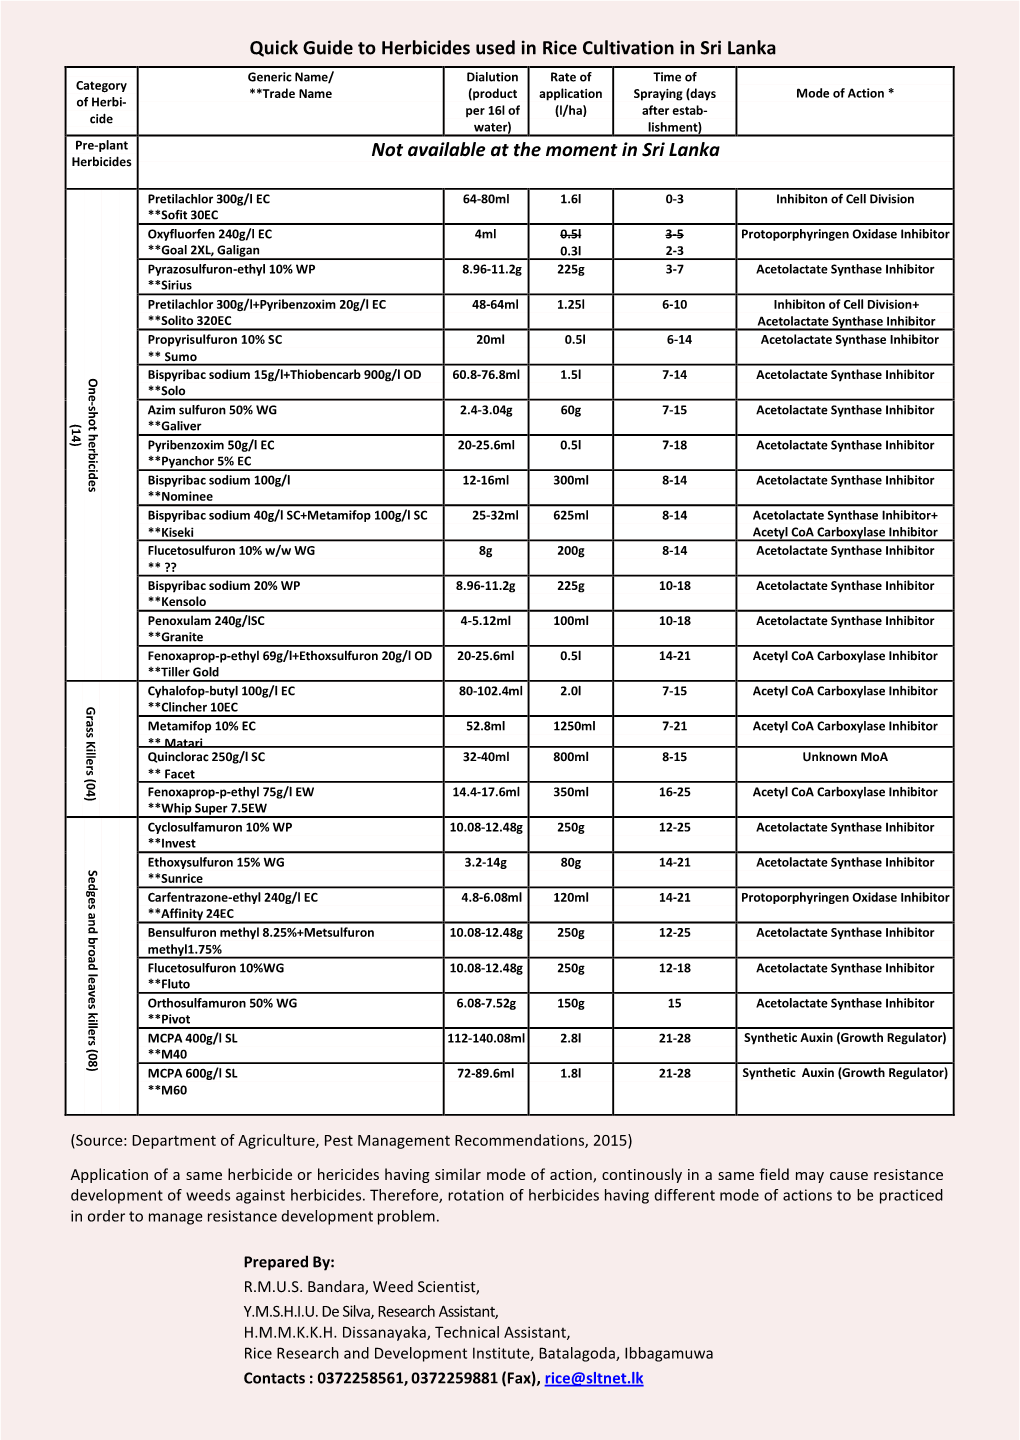 Quick Guide to Herbicides Used in Rice Cultivation in Sri Lanka